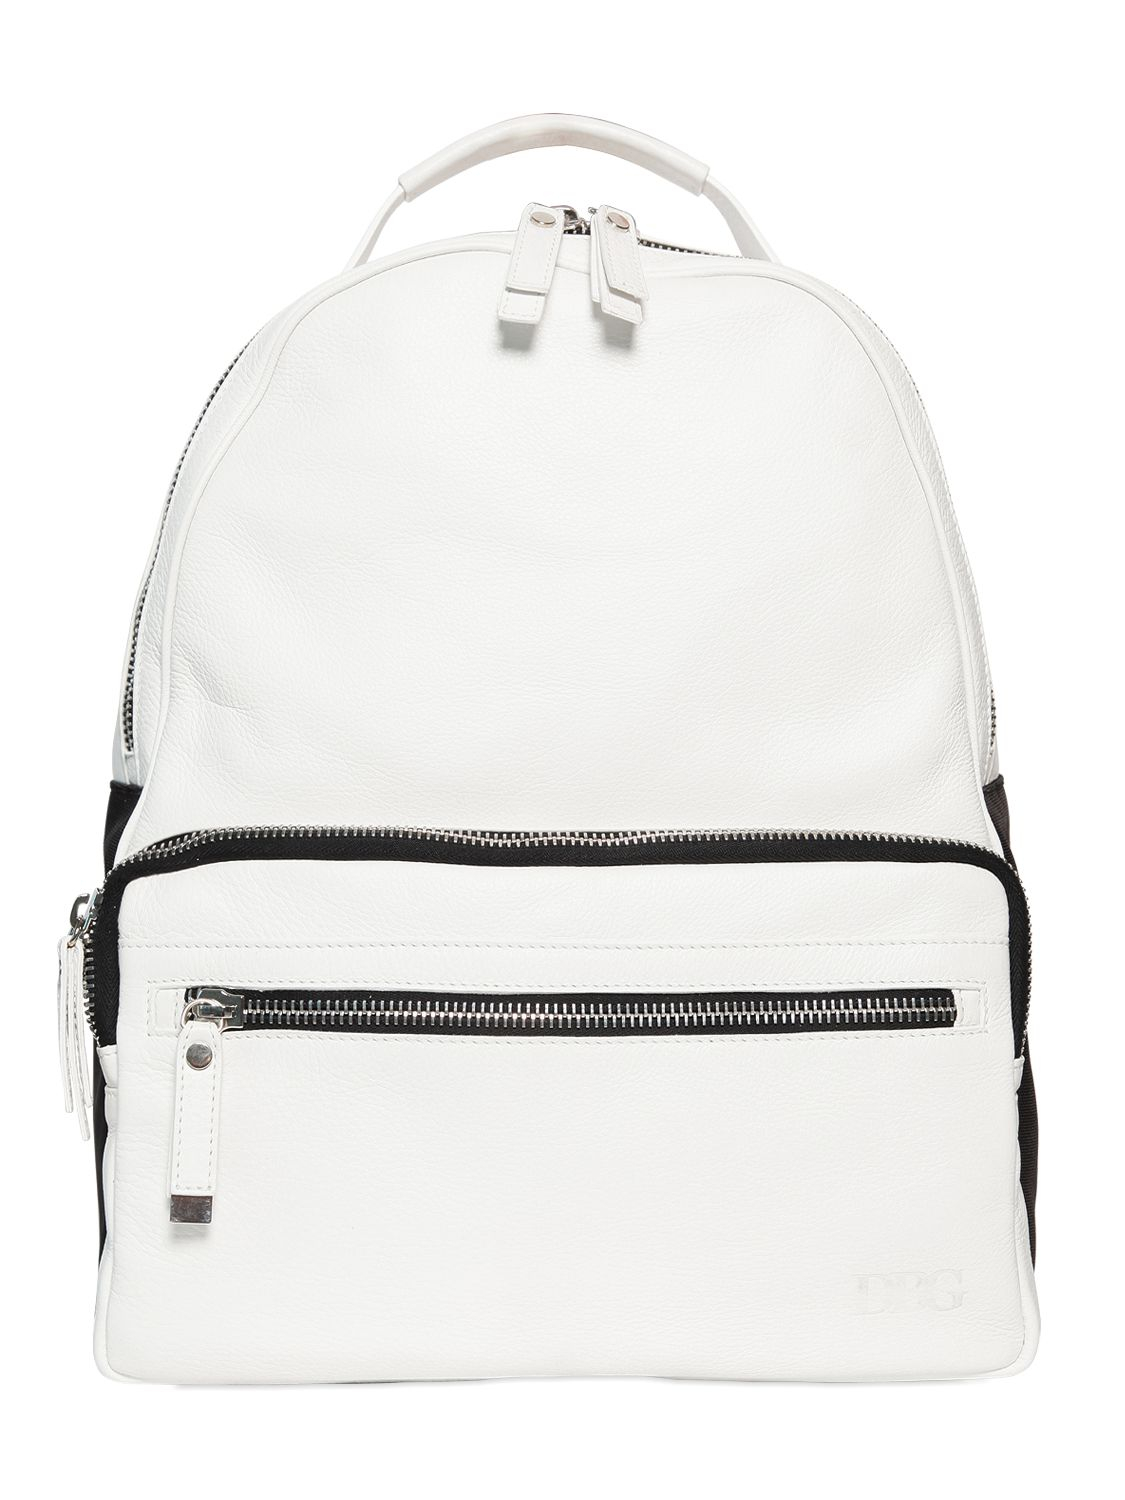 Lyst - Diesel black gold Grained Leather Backpack in White for Men